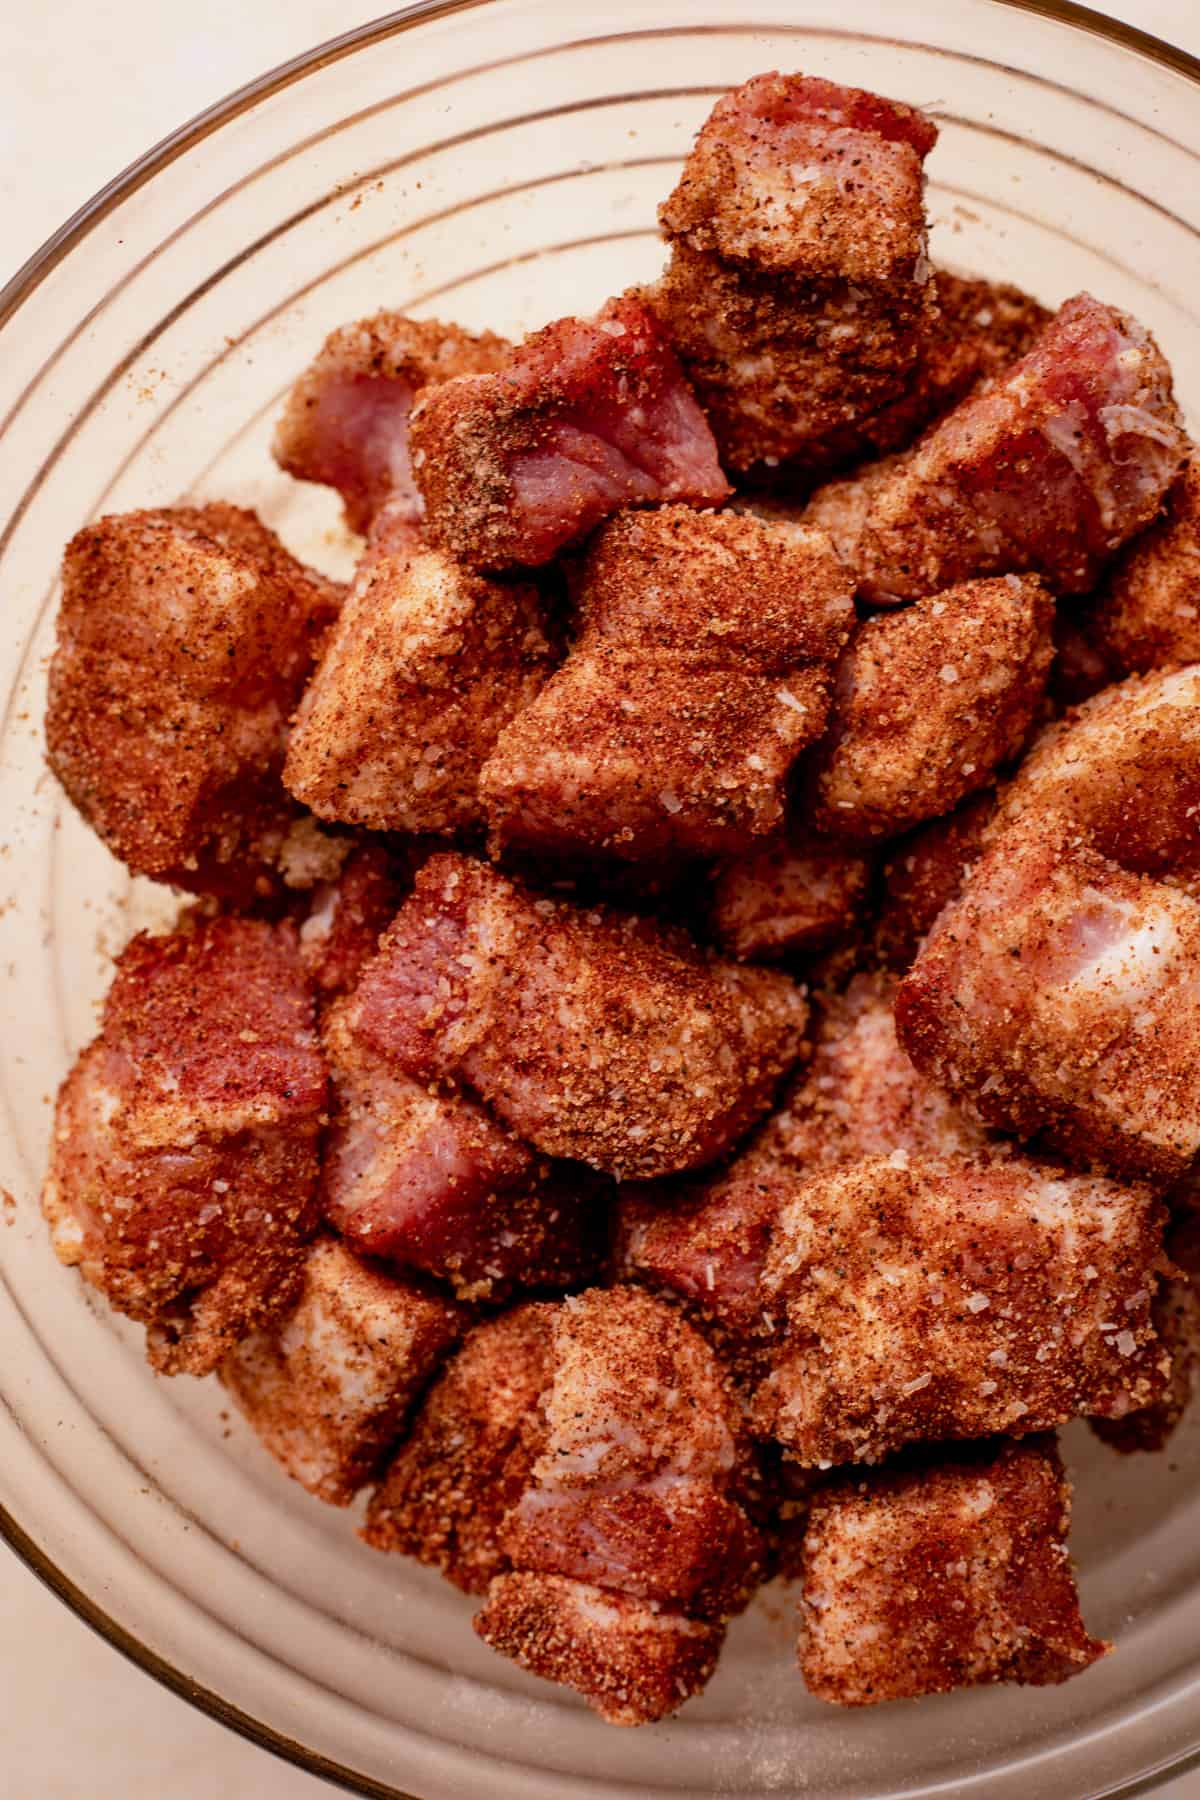 Bowl of cubed pork belly coated in a seasoning rub.